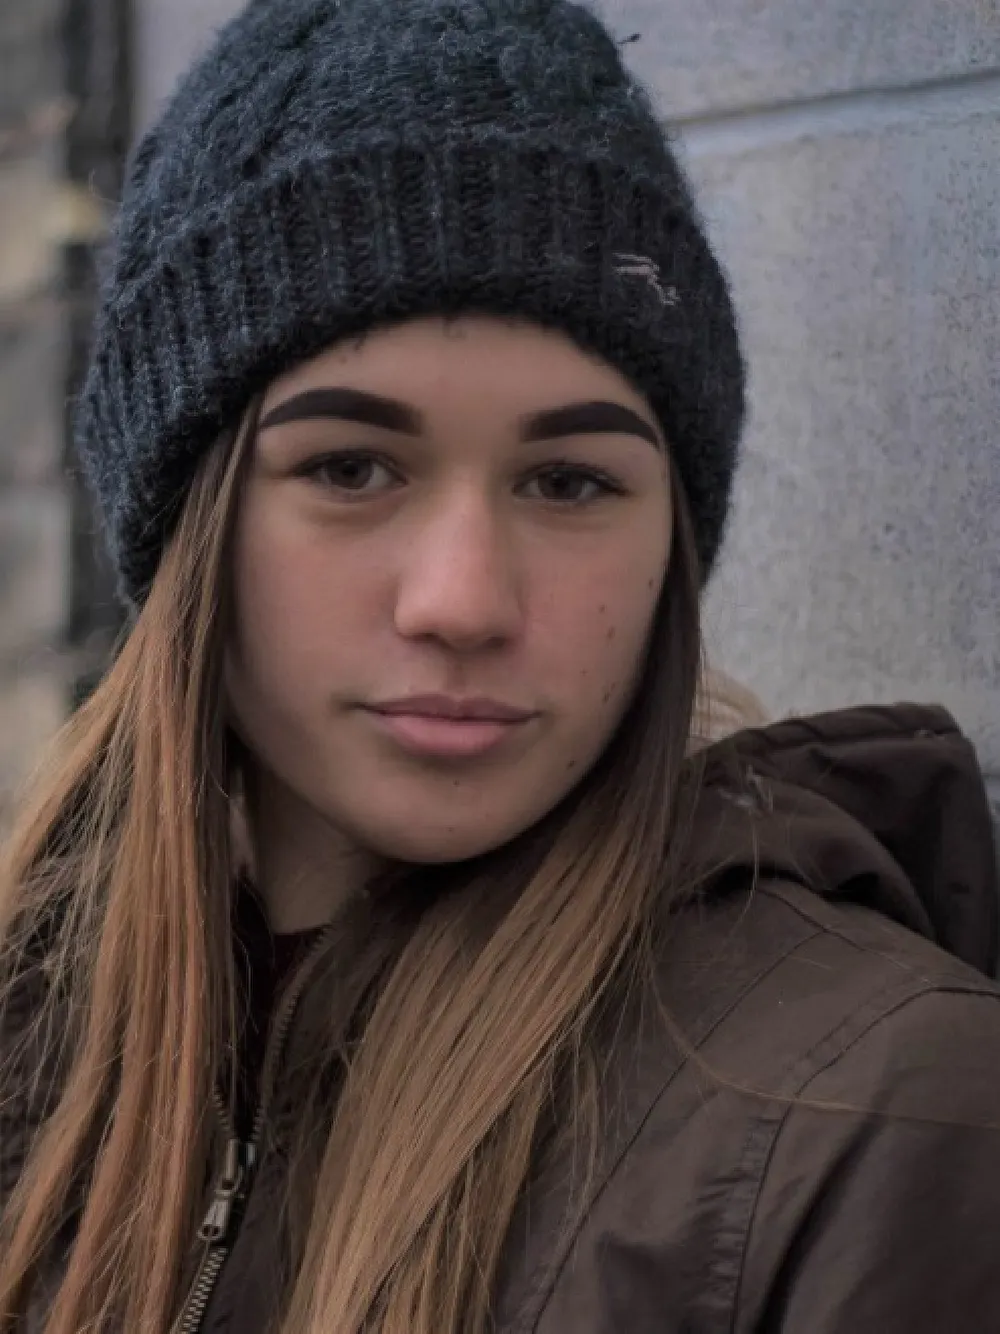 Photo of a young woman with long hair. She's wearing a grey woolly hat.